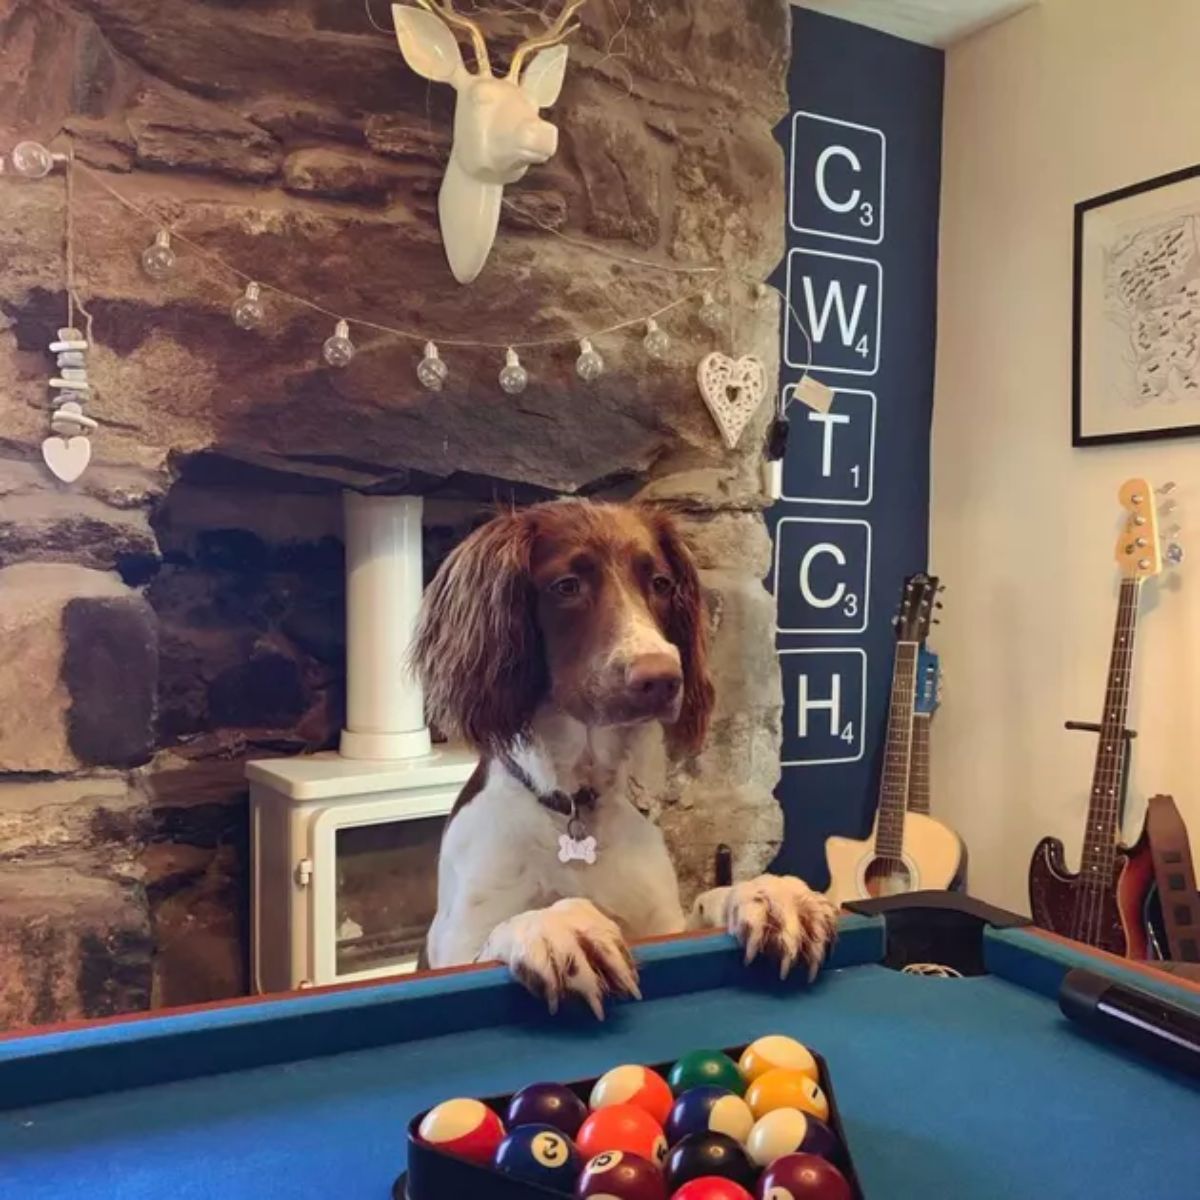 brown and white dog standing on hind legs with front paws on a blue pool table